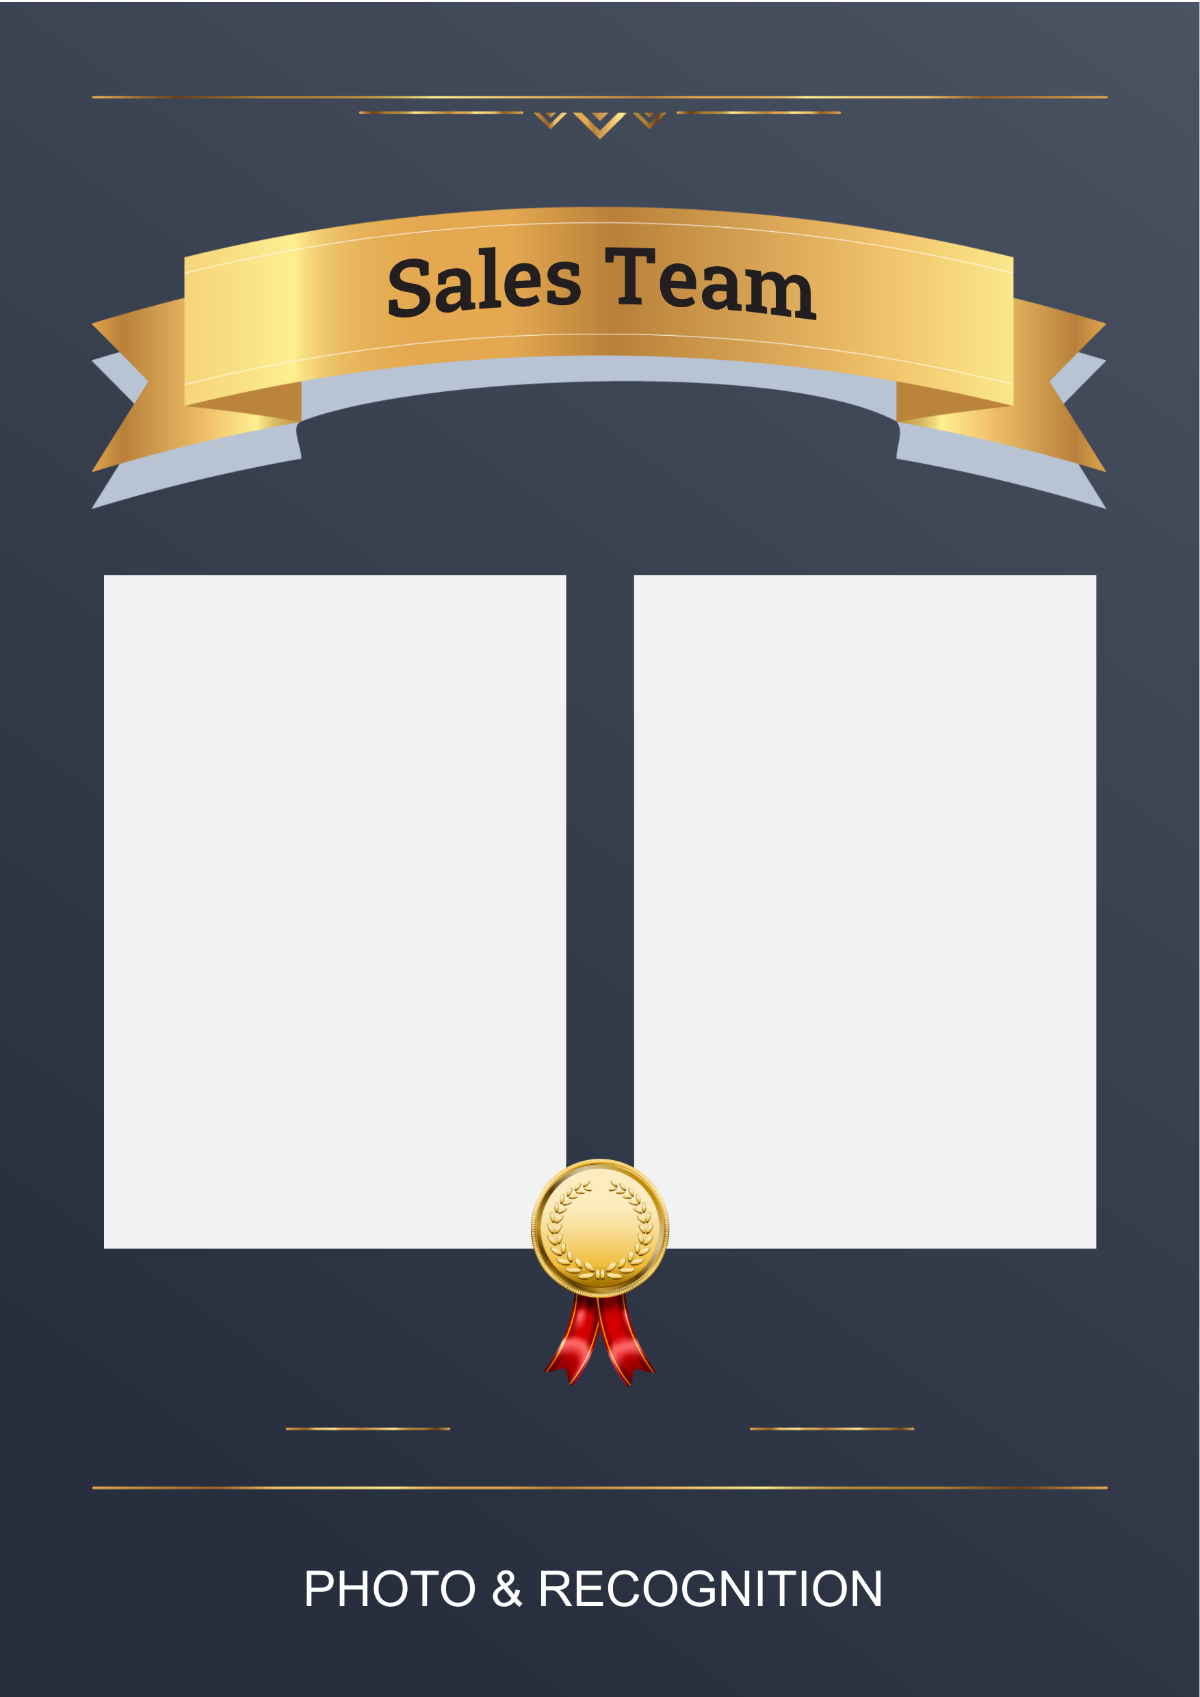 Sales Team Photo and Recognition Signage Template